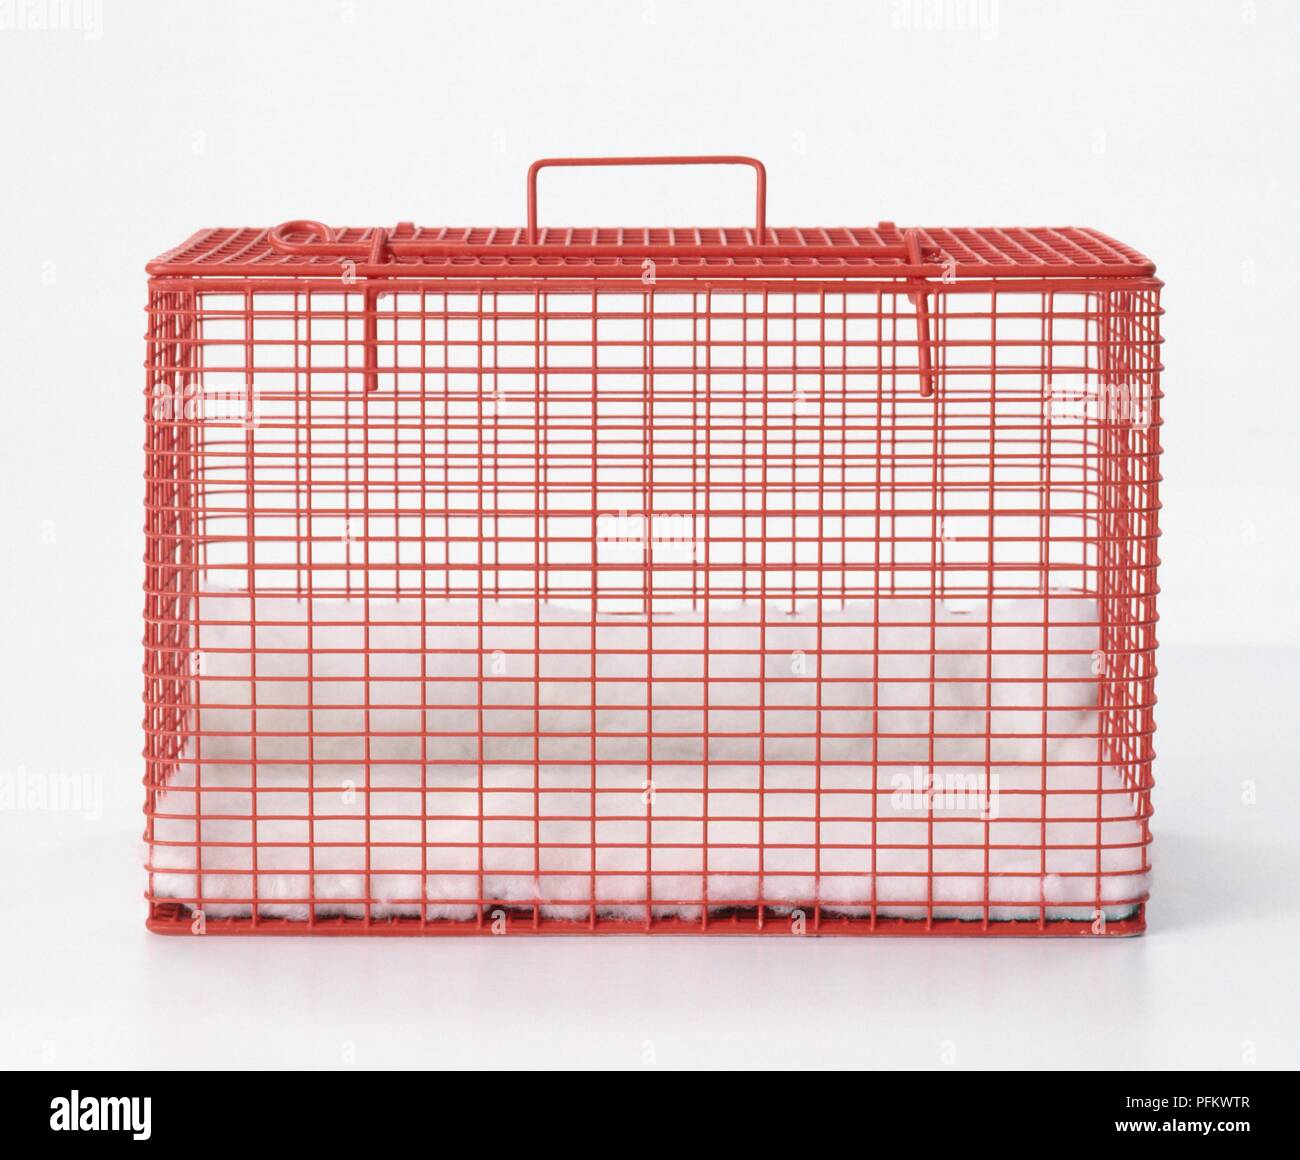 Red wire mesh pet carrier with soft blanket inside Stock Photo